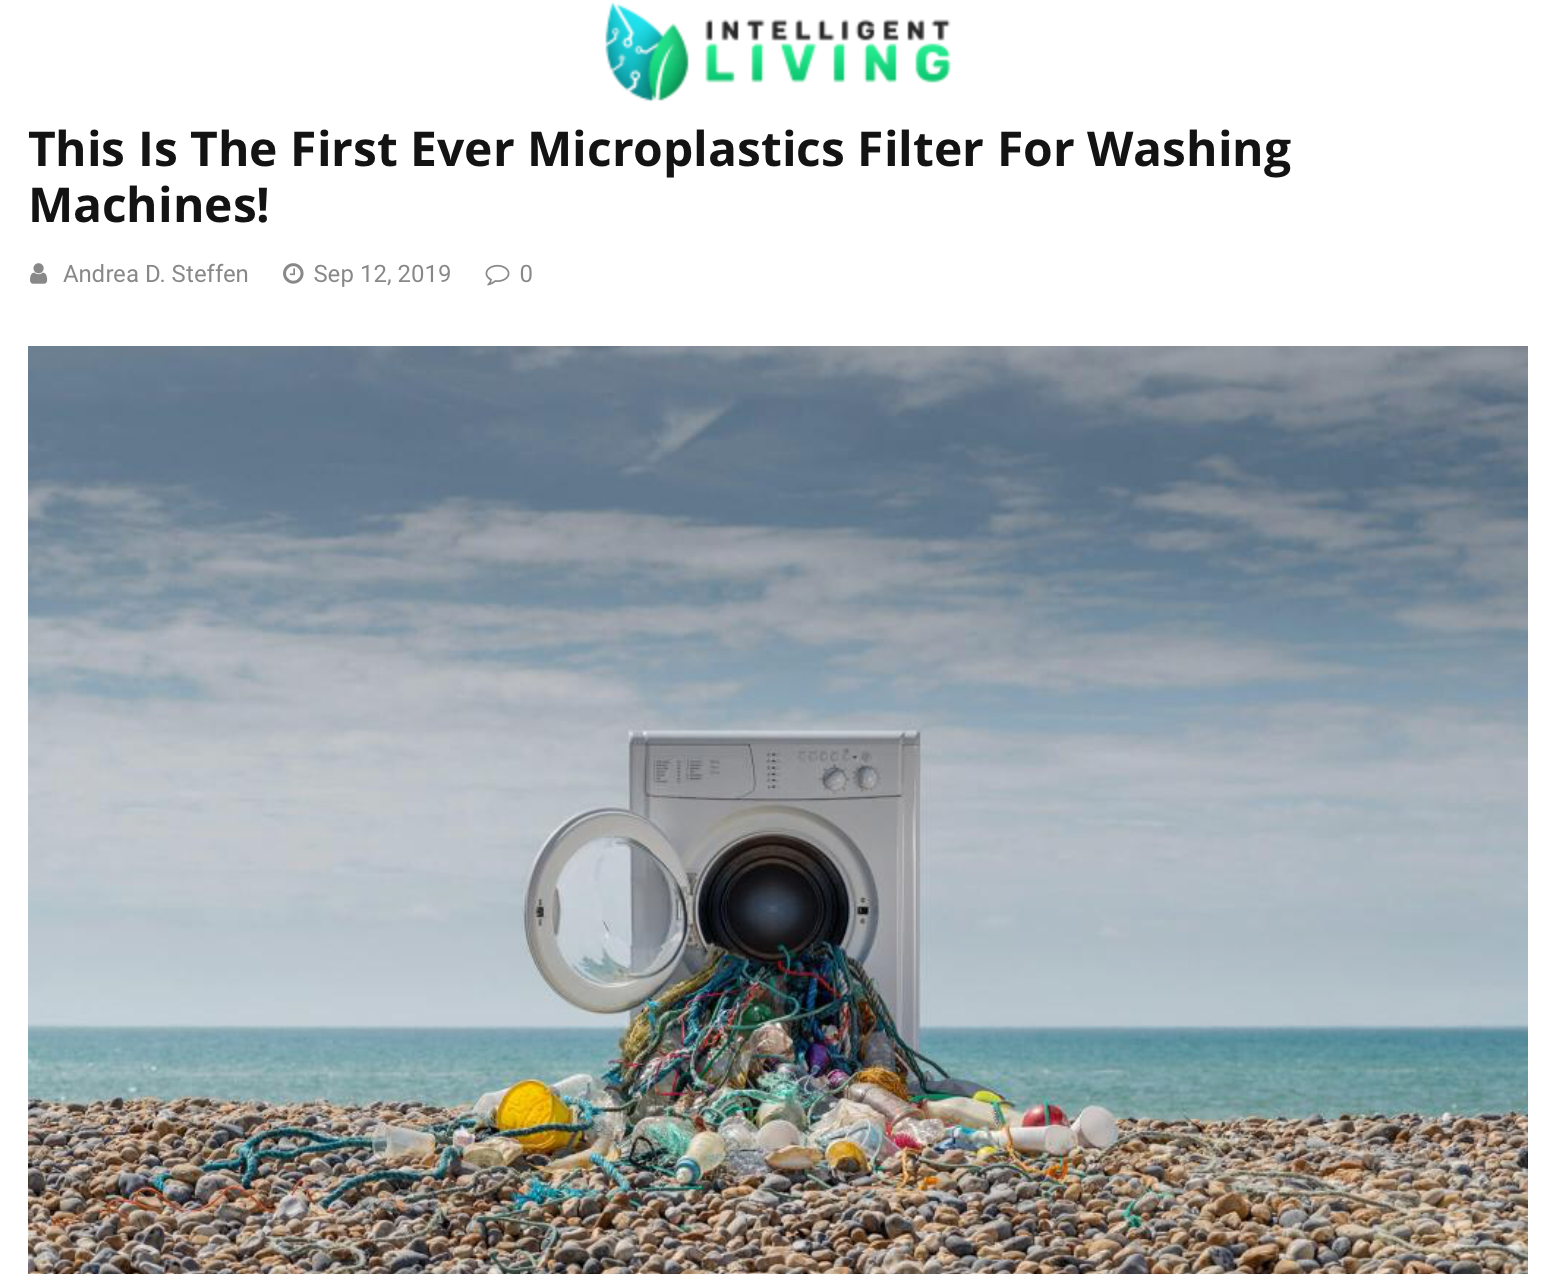 This is the first ever microplastics filter for washing machines!